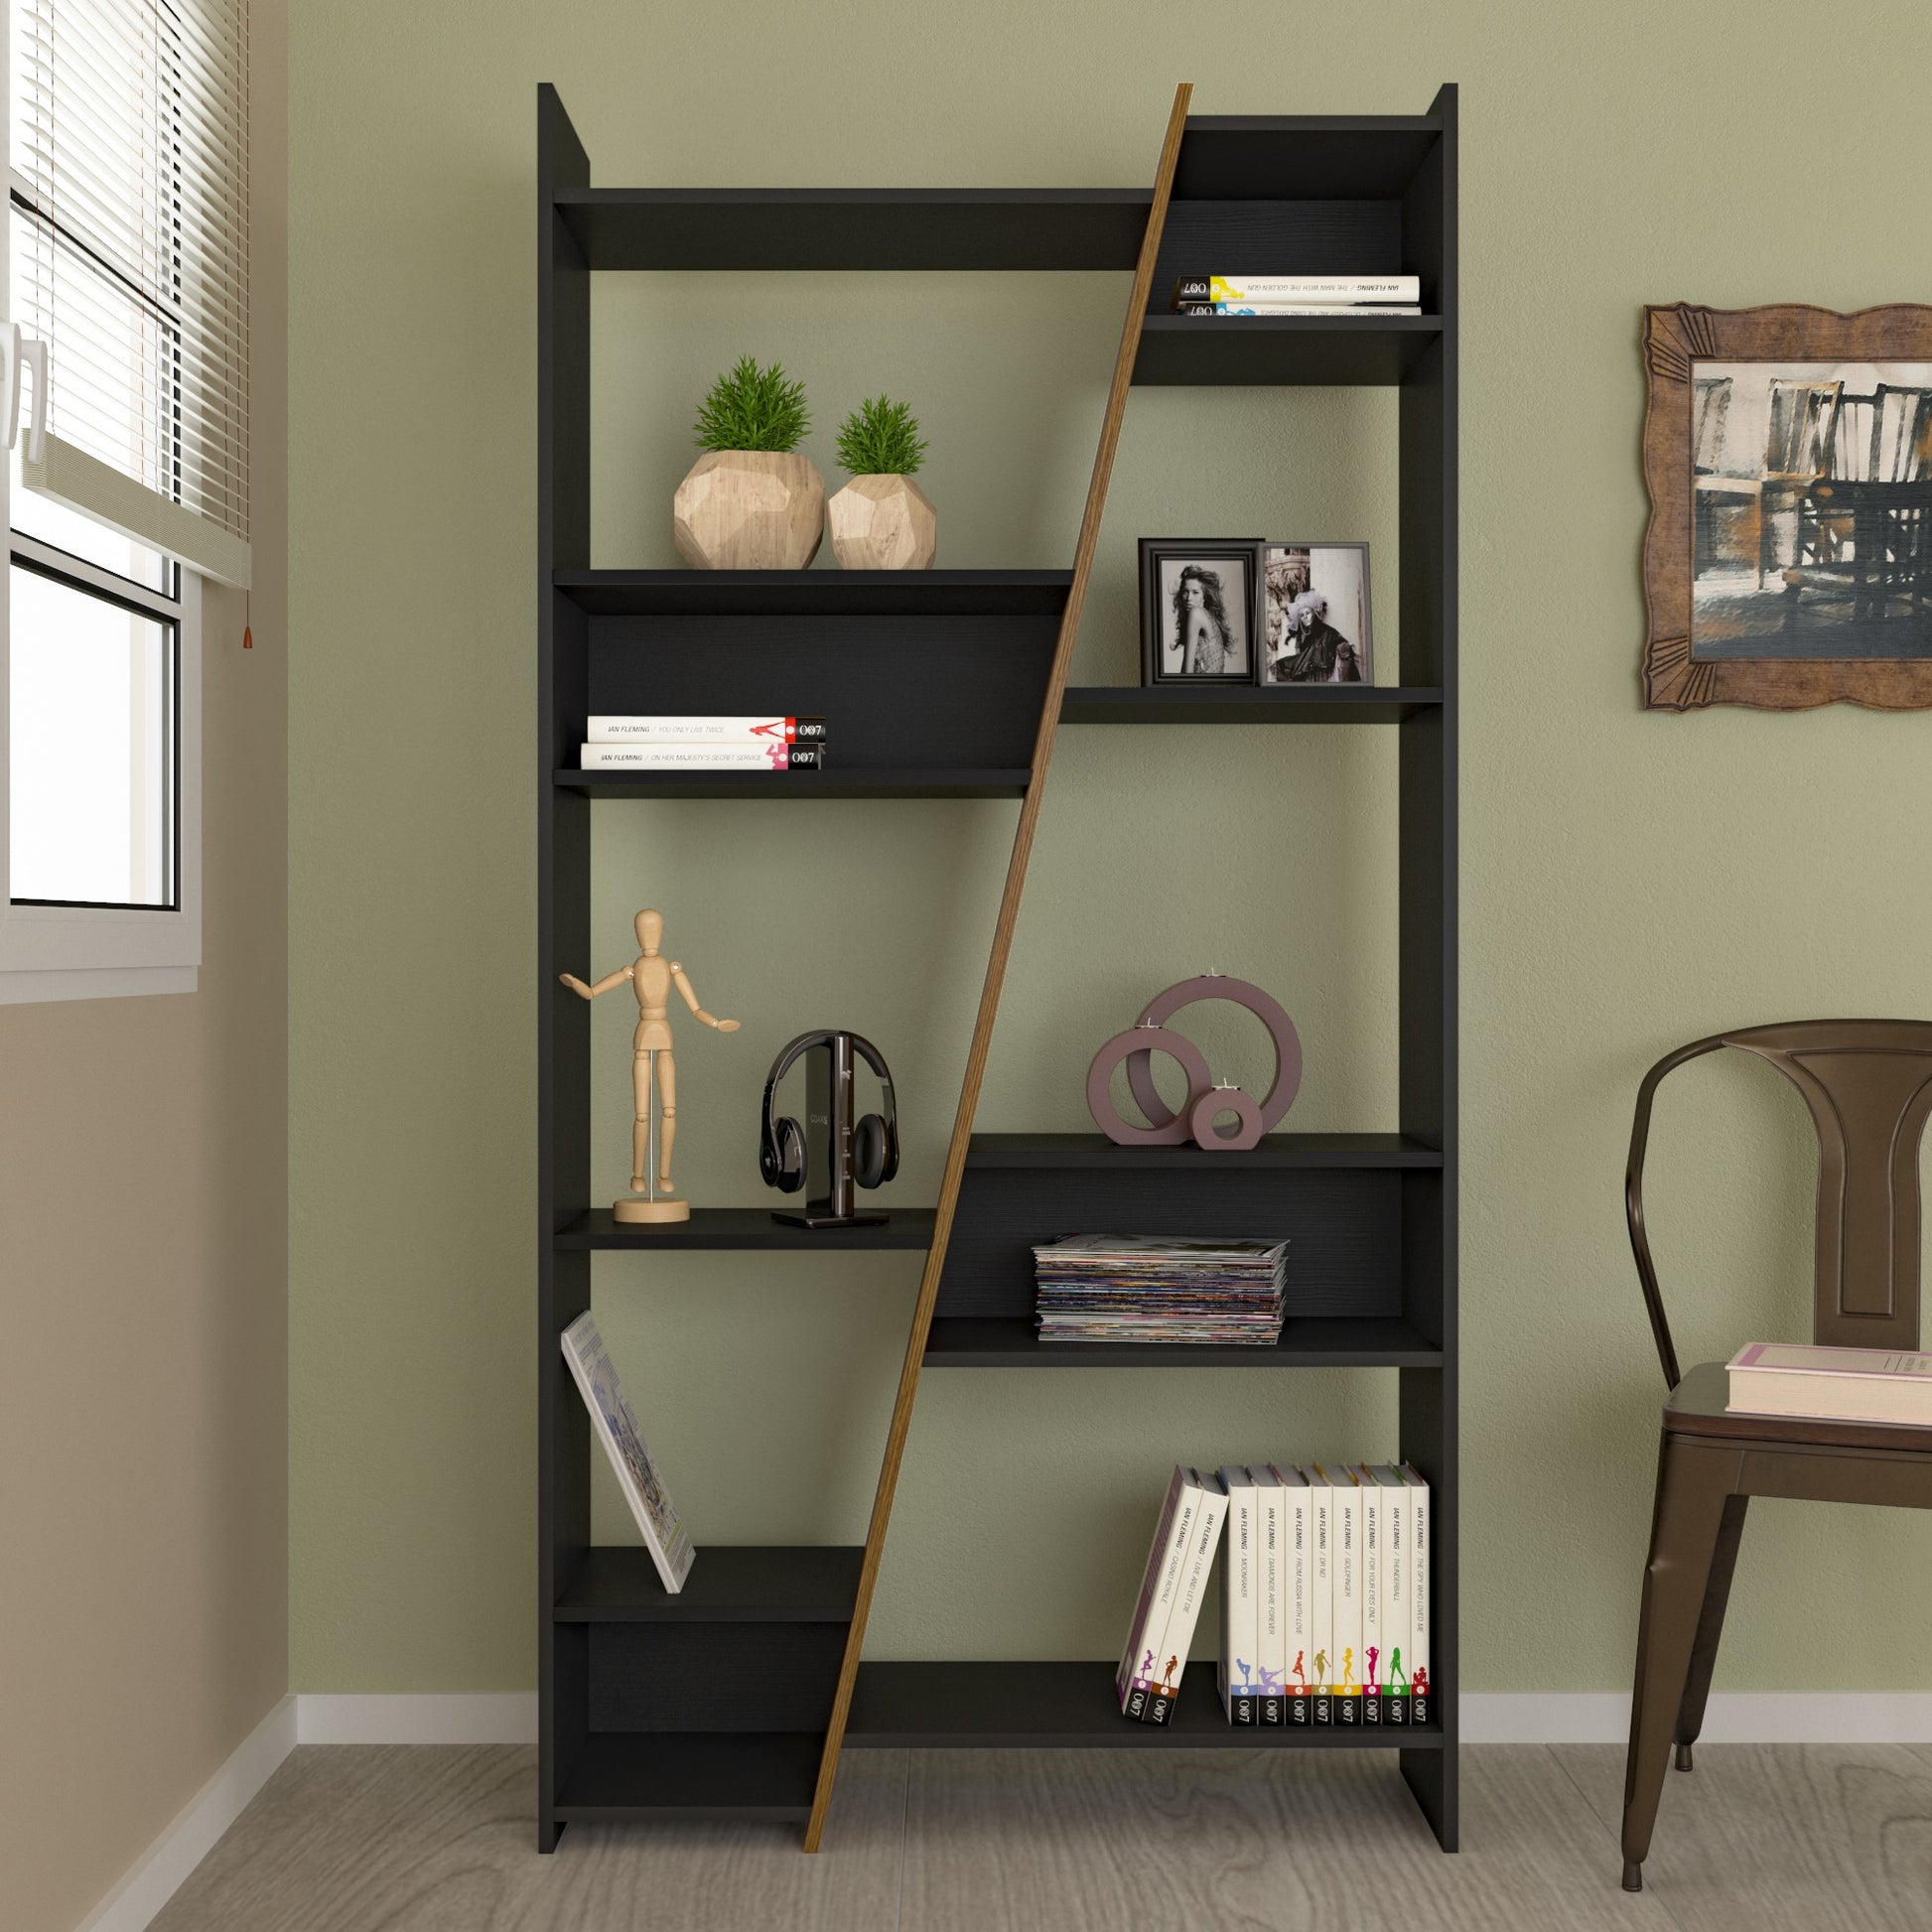 NAPLES-TALL-BOOKCASE-BLACK-AND-PINE-EFFECT-300-306-043-6.jpg